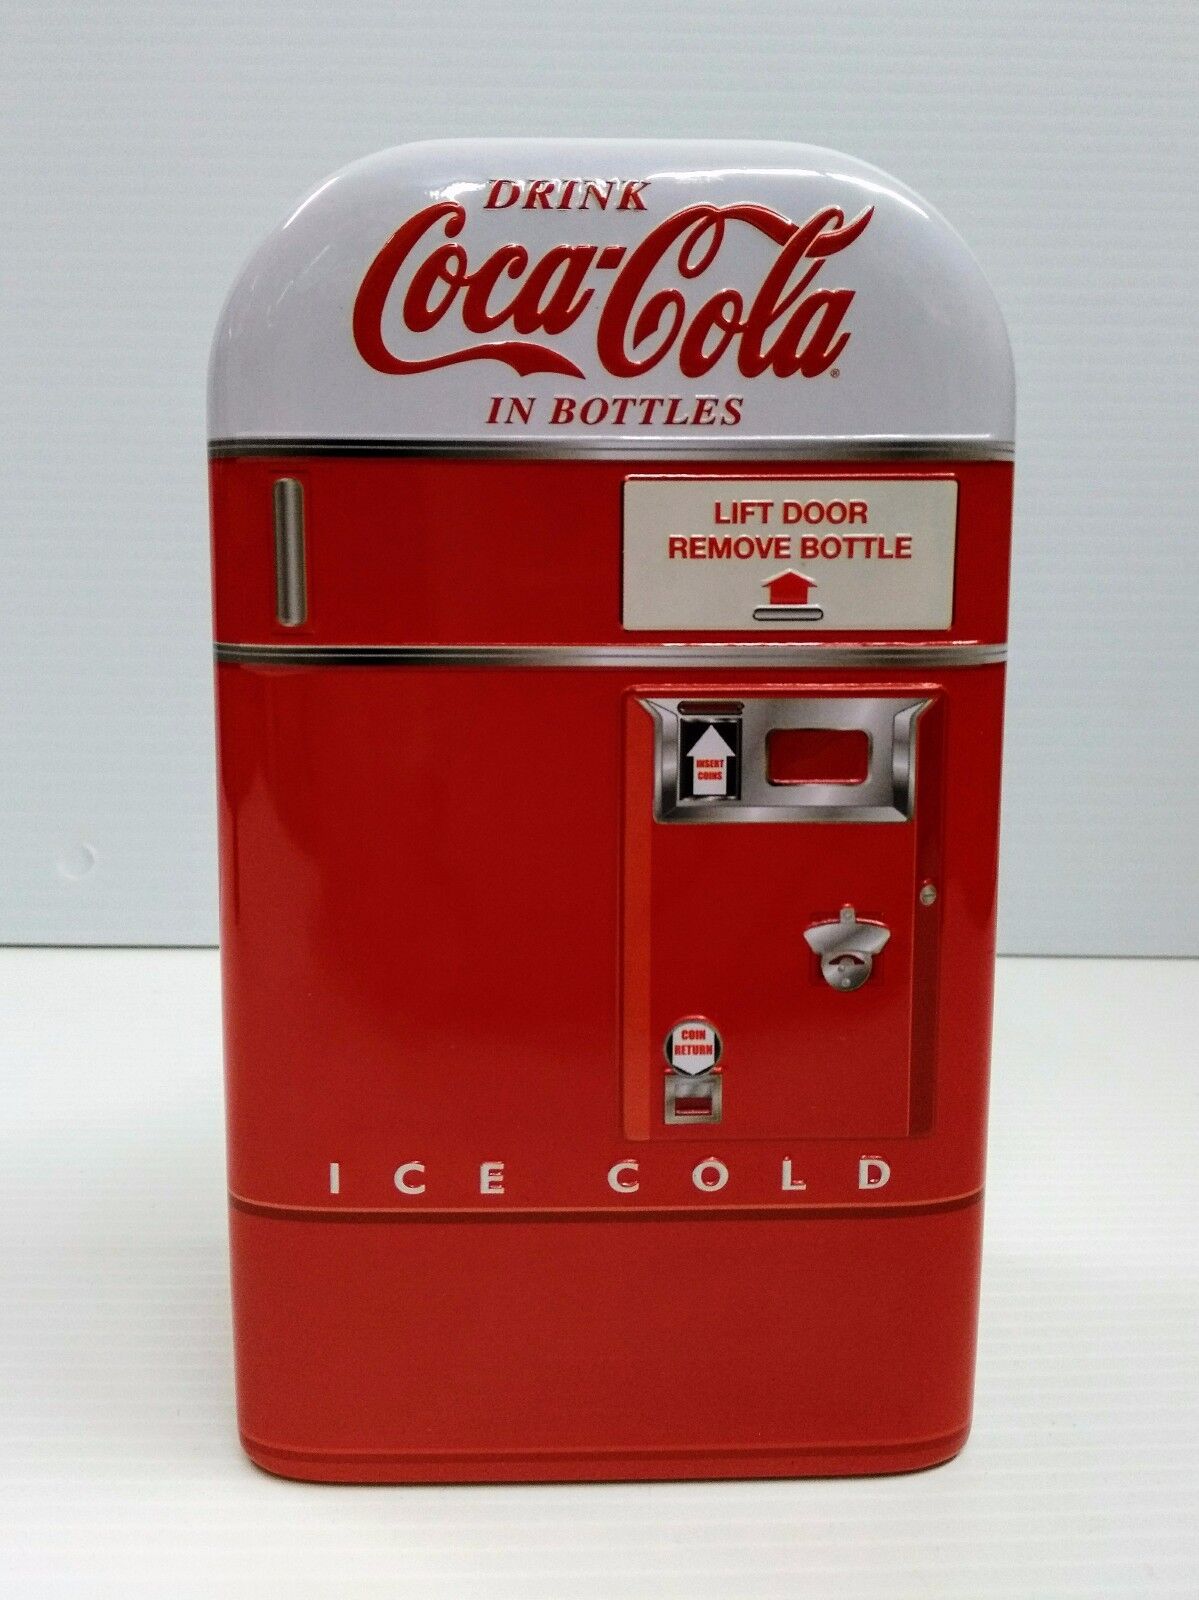 Coca-Cola Vending Machine Tin Bank Red Drink In Bottles Coke Ice Cold